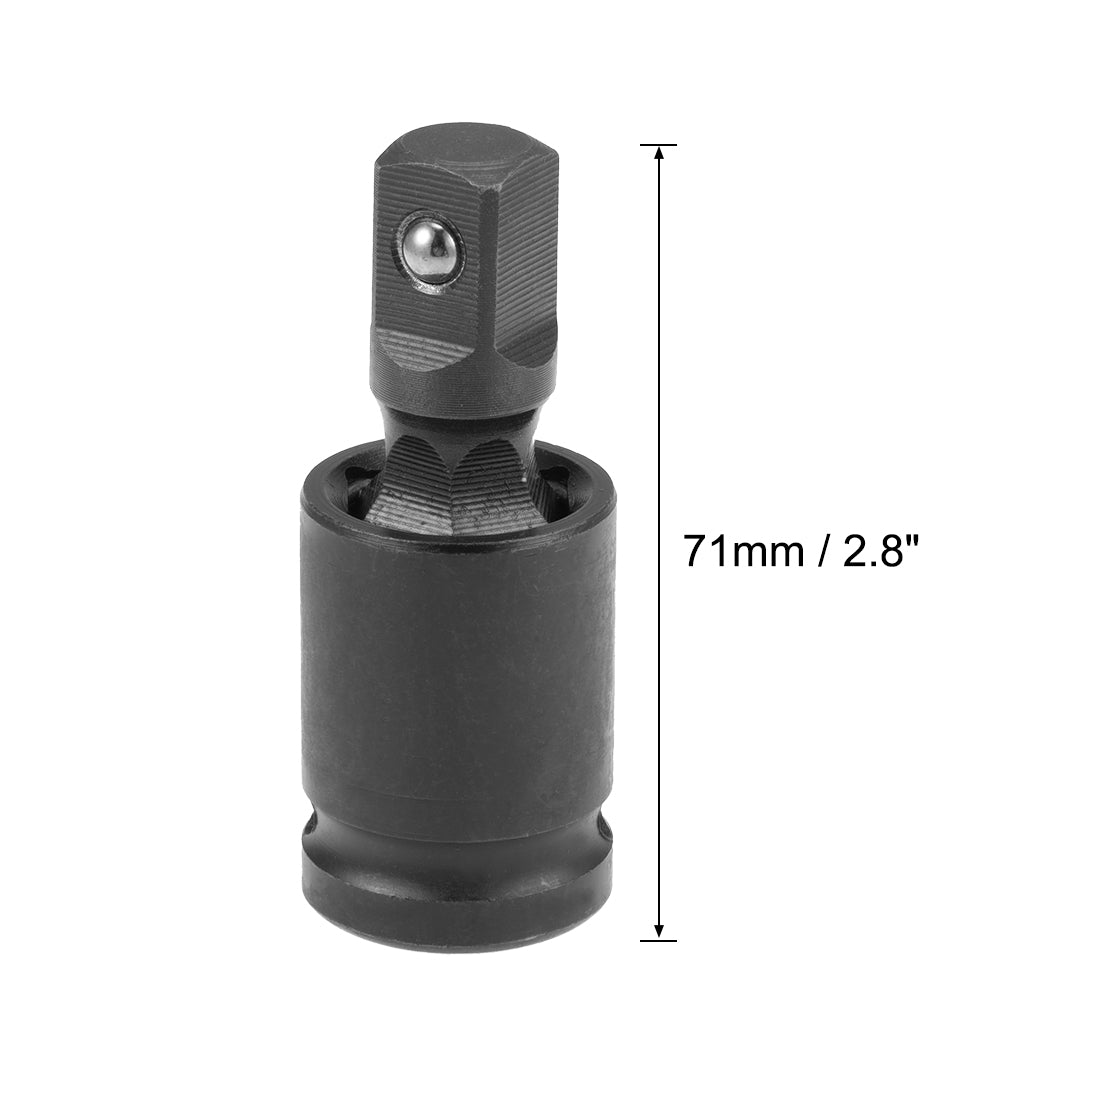 uxcell Uxcell 1/2 Inch Drive Universal Joint Swivel Deep Impact Socket, Cr-V